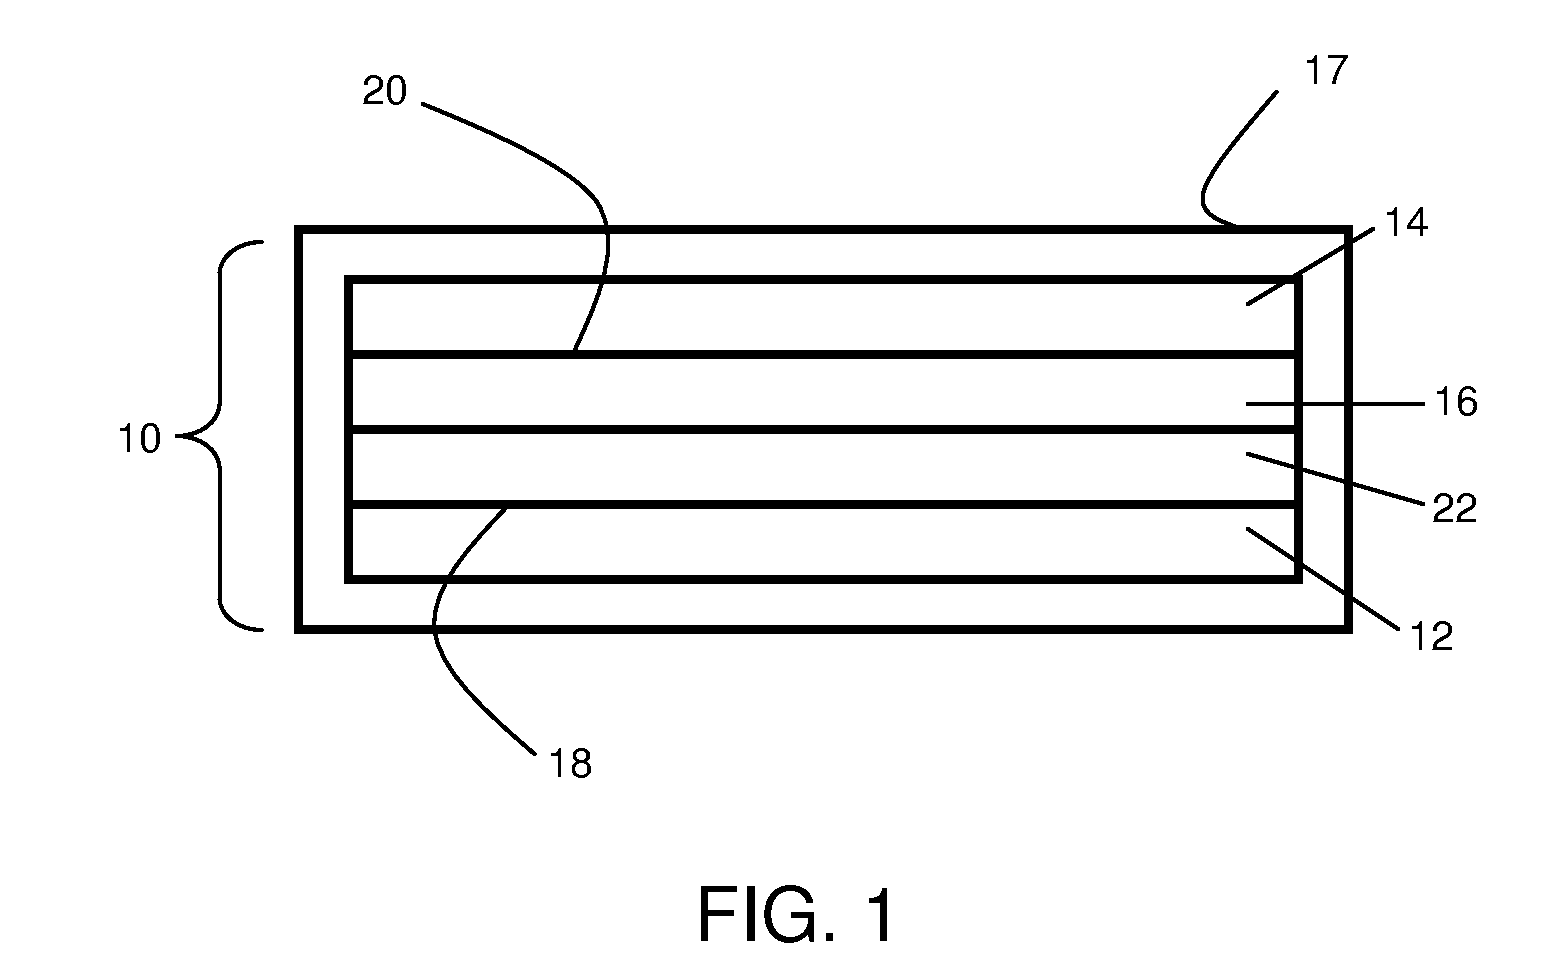 Electrolyte materials for use in electrochemical cells